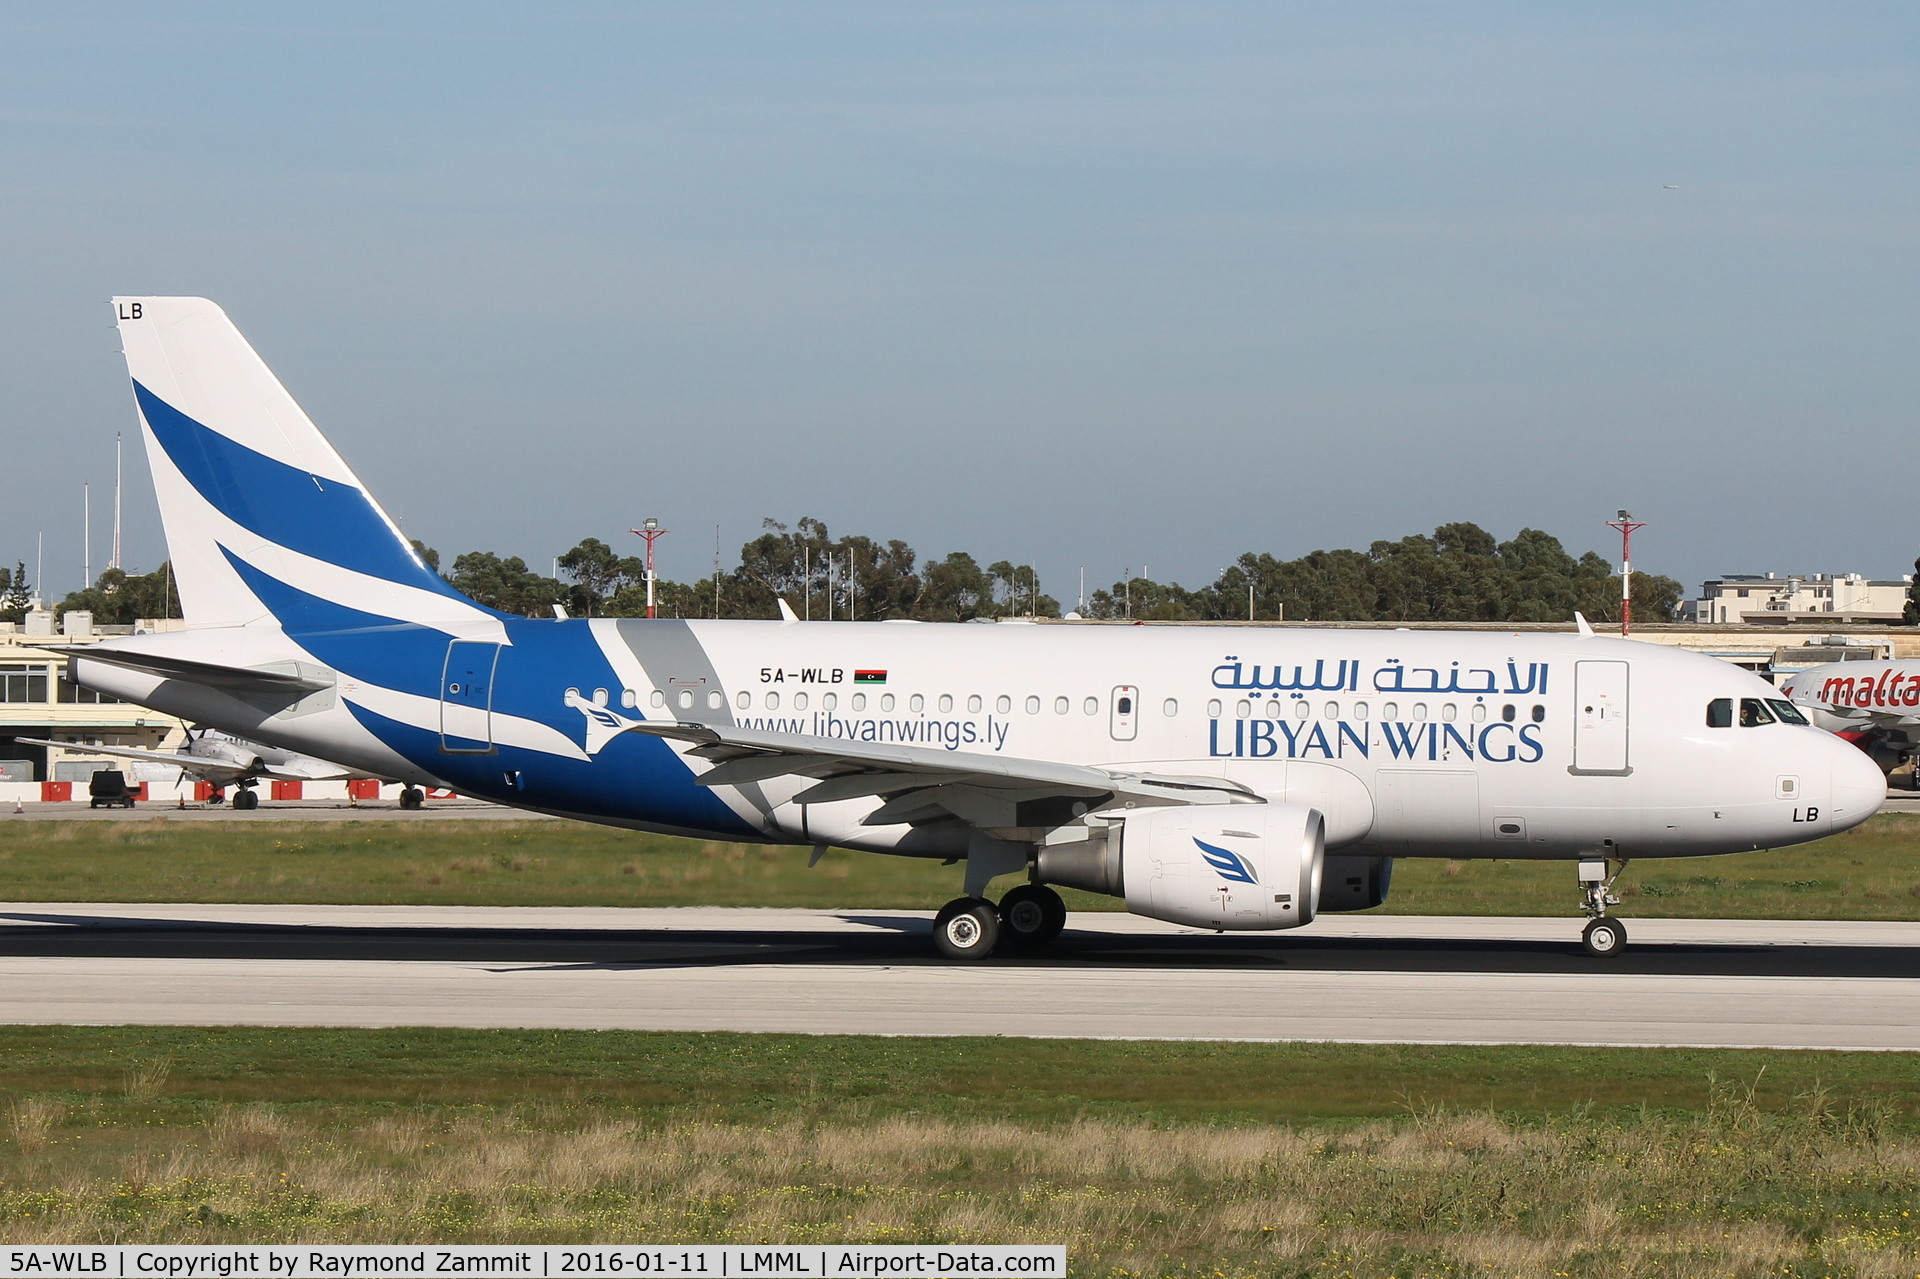 5A-WLB, 2006 Airbus A319-112 C/N 2954, A319 5A-WLB Libyan Wings